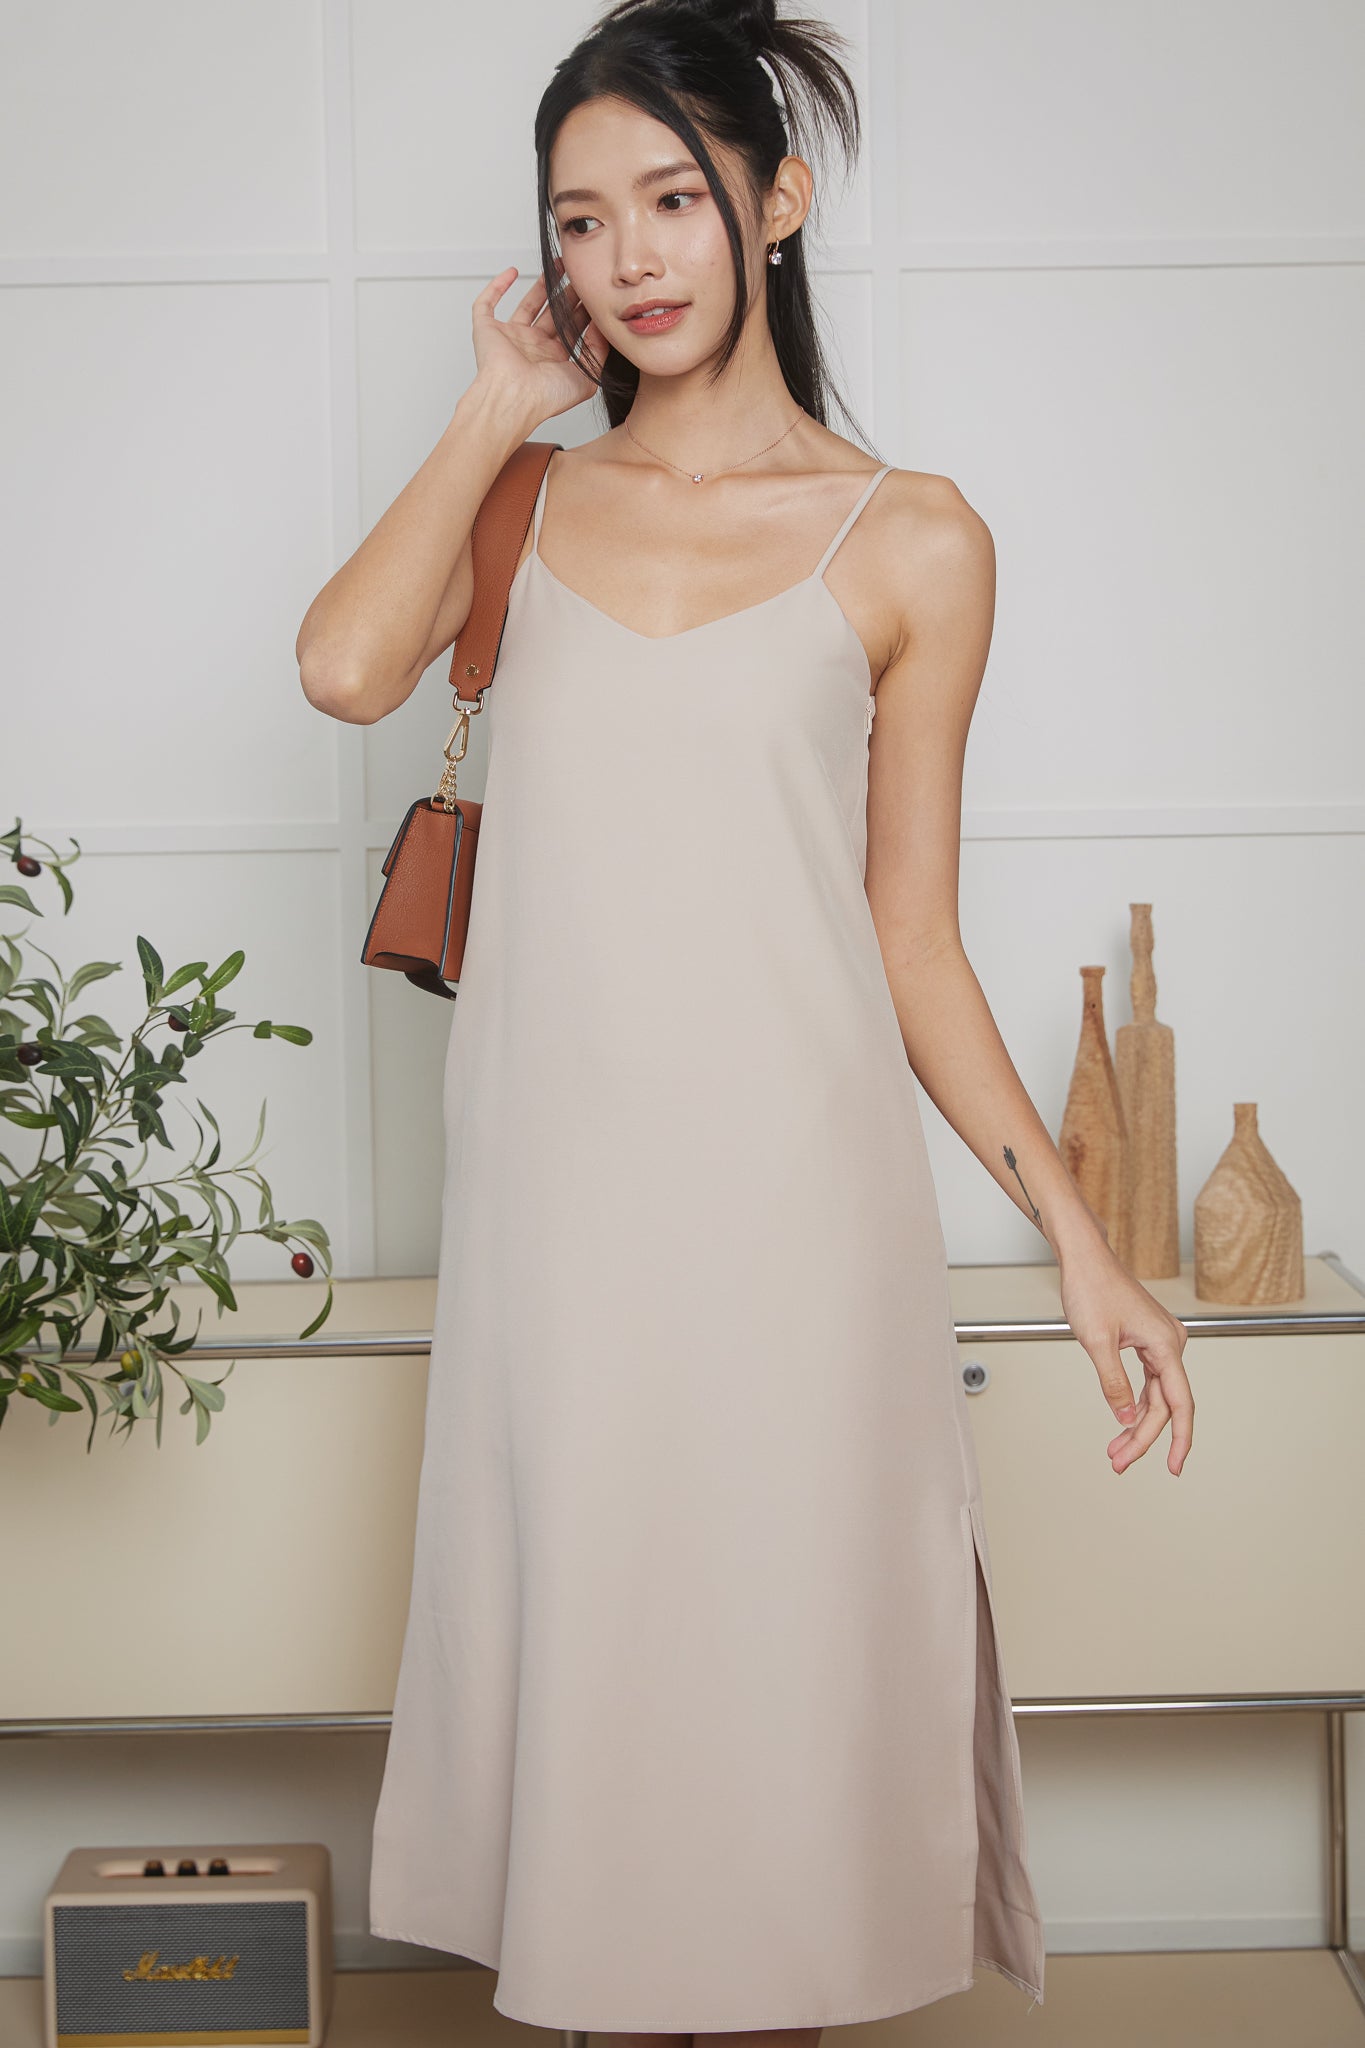 Two-Way Side Slits Strappy Dress in Nude